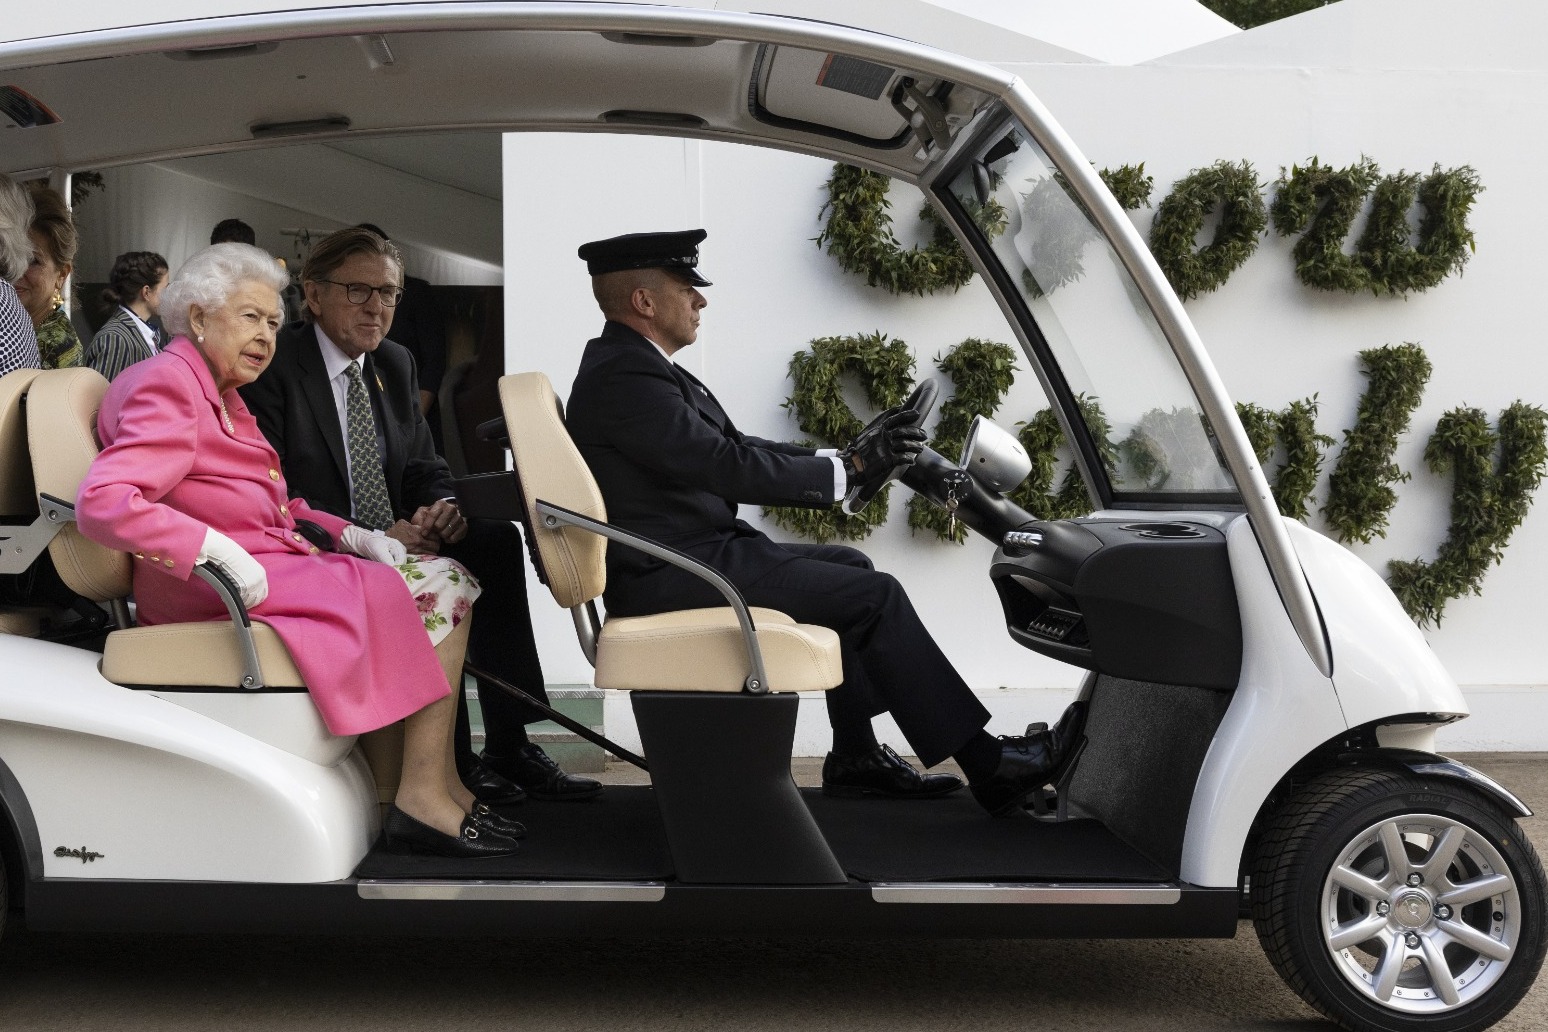 The Queenmobile: Queen uses buggy to visit Chelsea Flower Show 